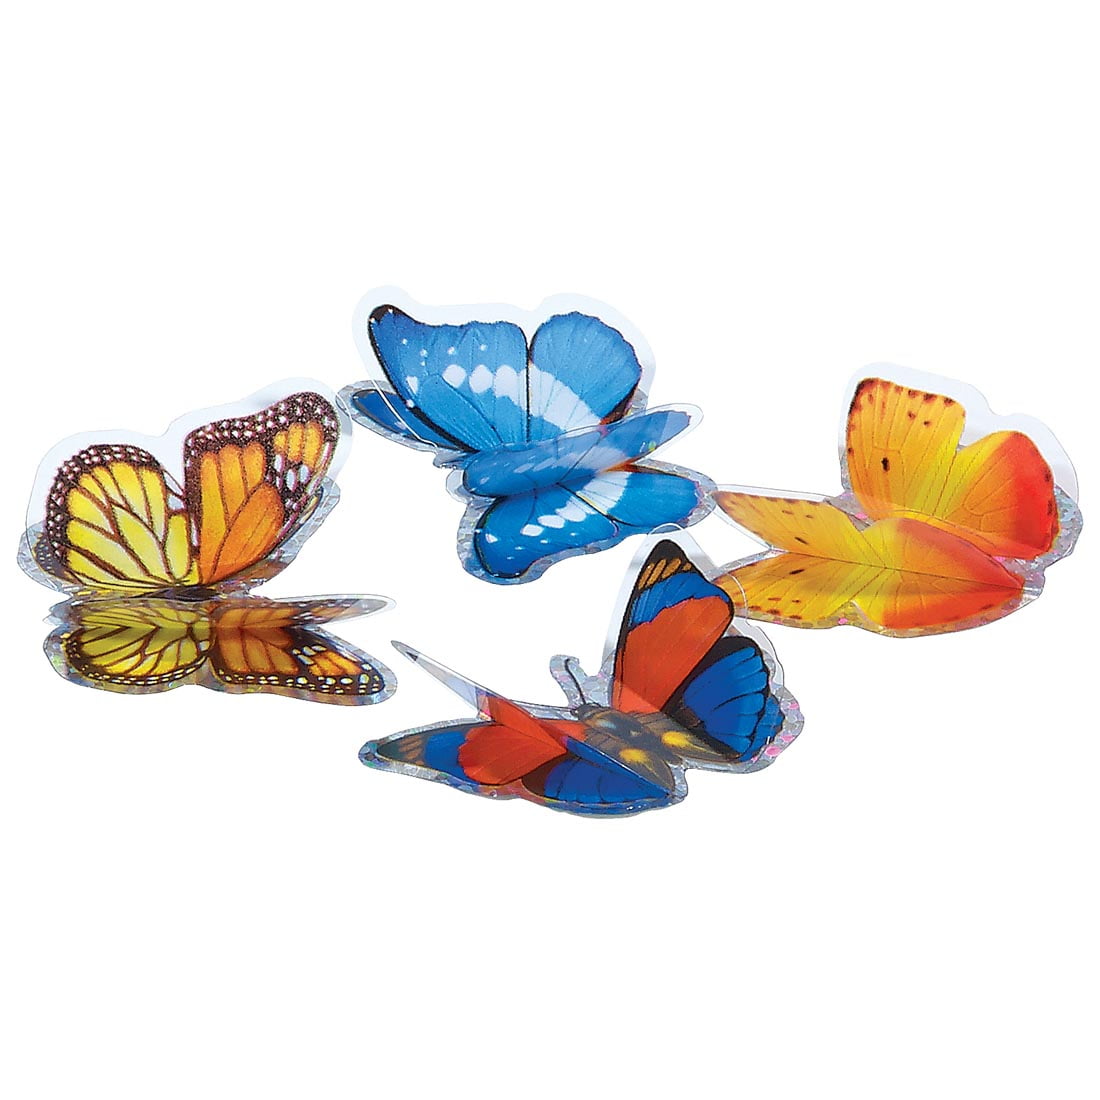 3D Butterfly Stickers 